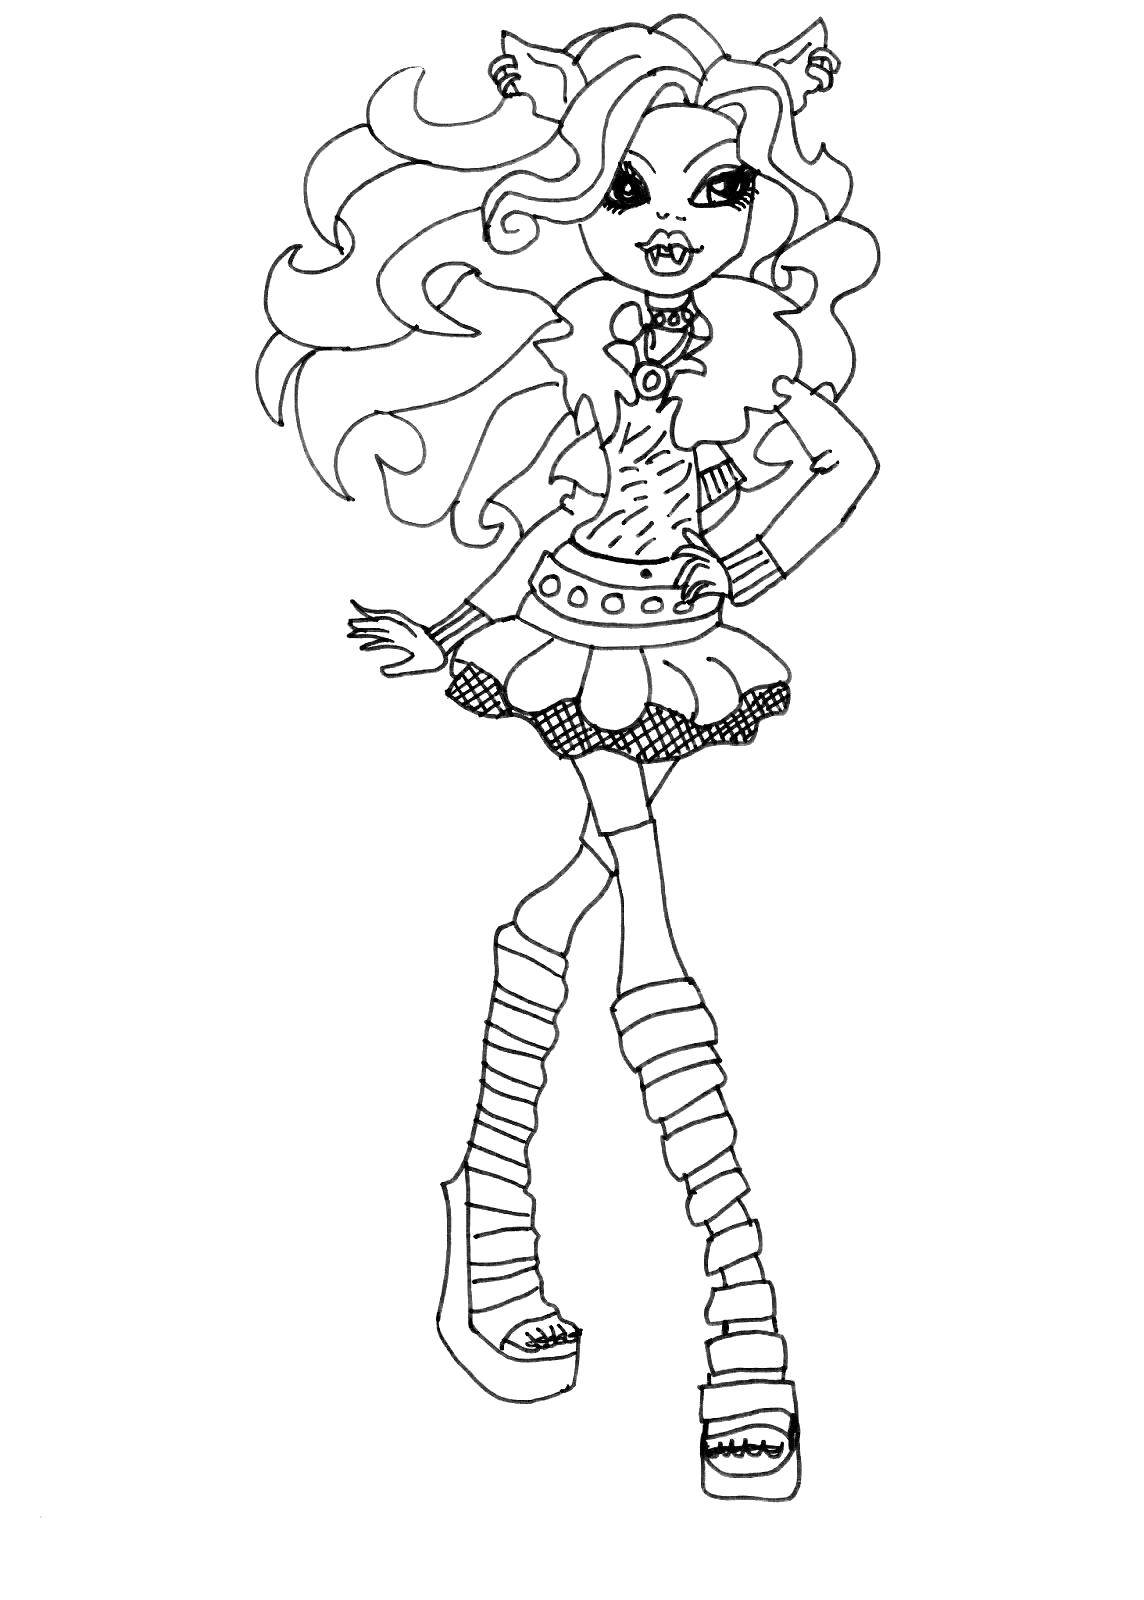 Coloring Glamorous student. Category monster high. Tags:  Monster High.